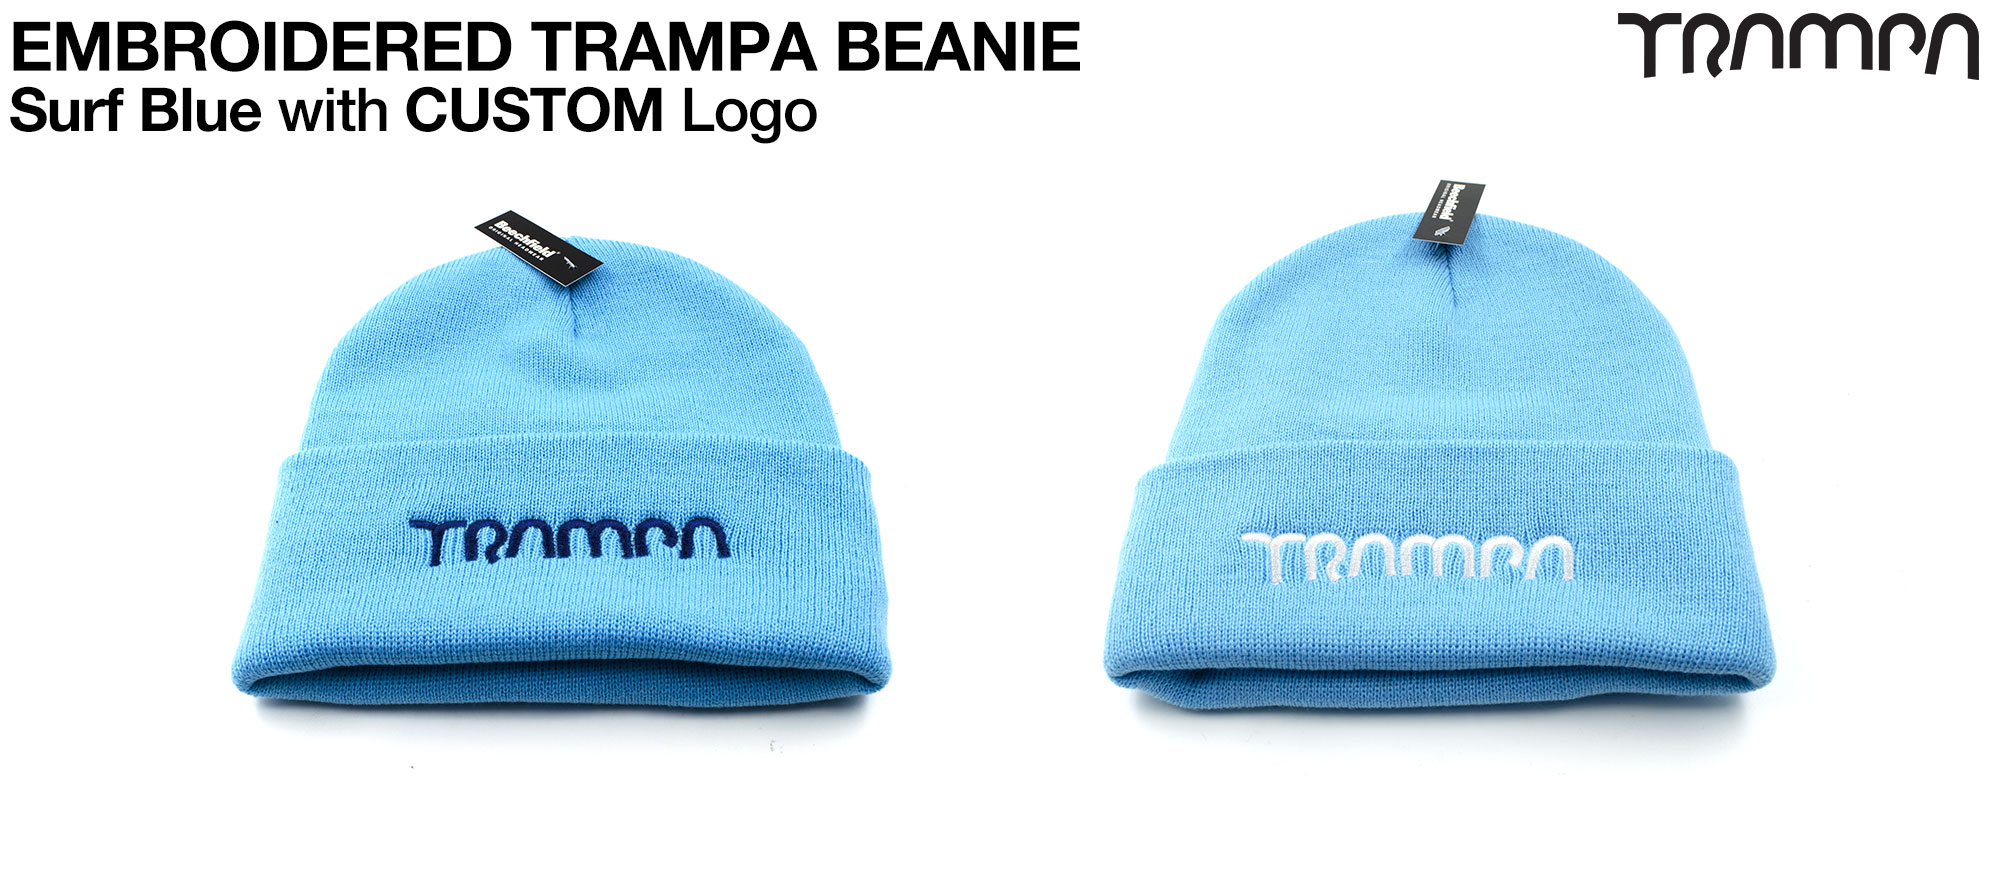 SURF BLUE Beanie hat with EMBROIDERED TRAMPA logo  - Double thick turn over for extra warmth